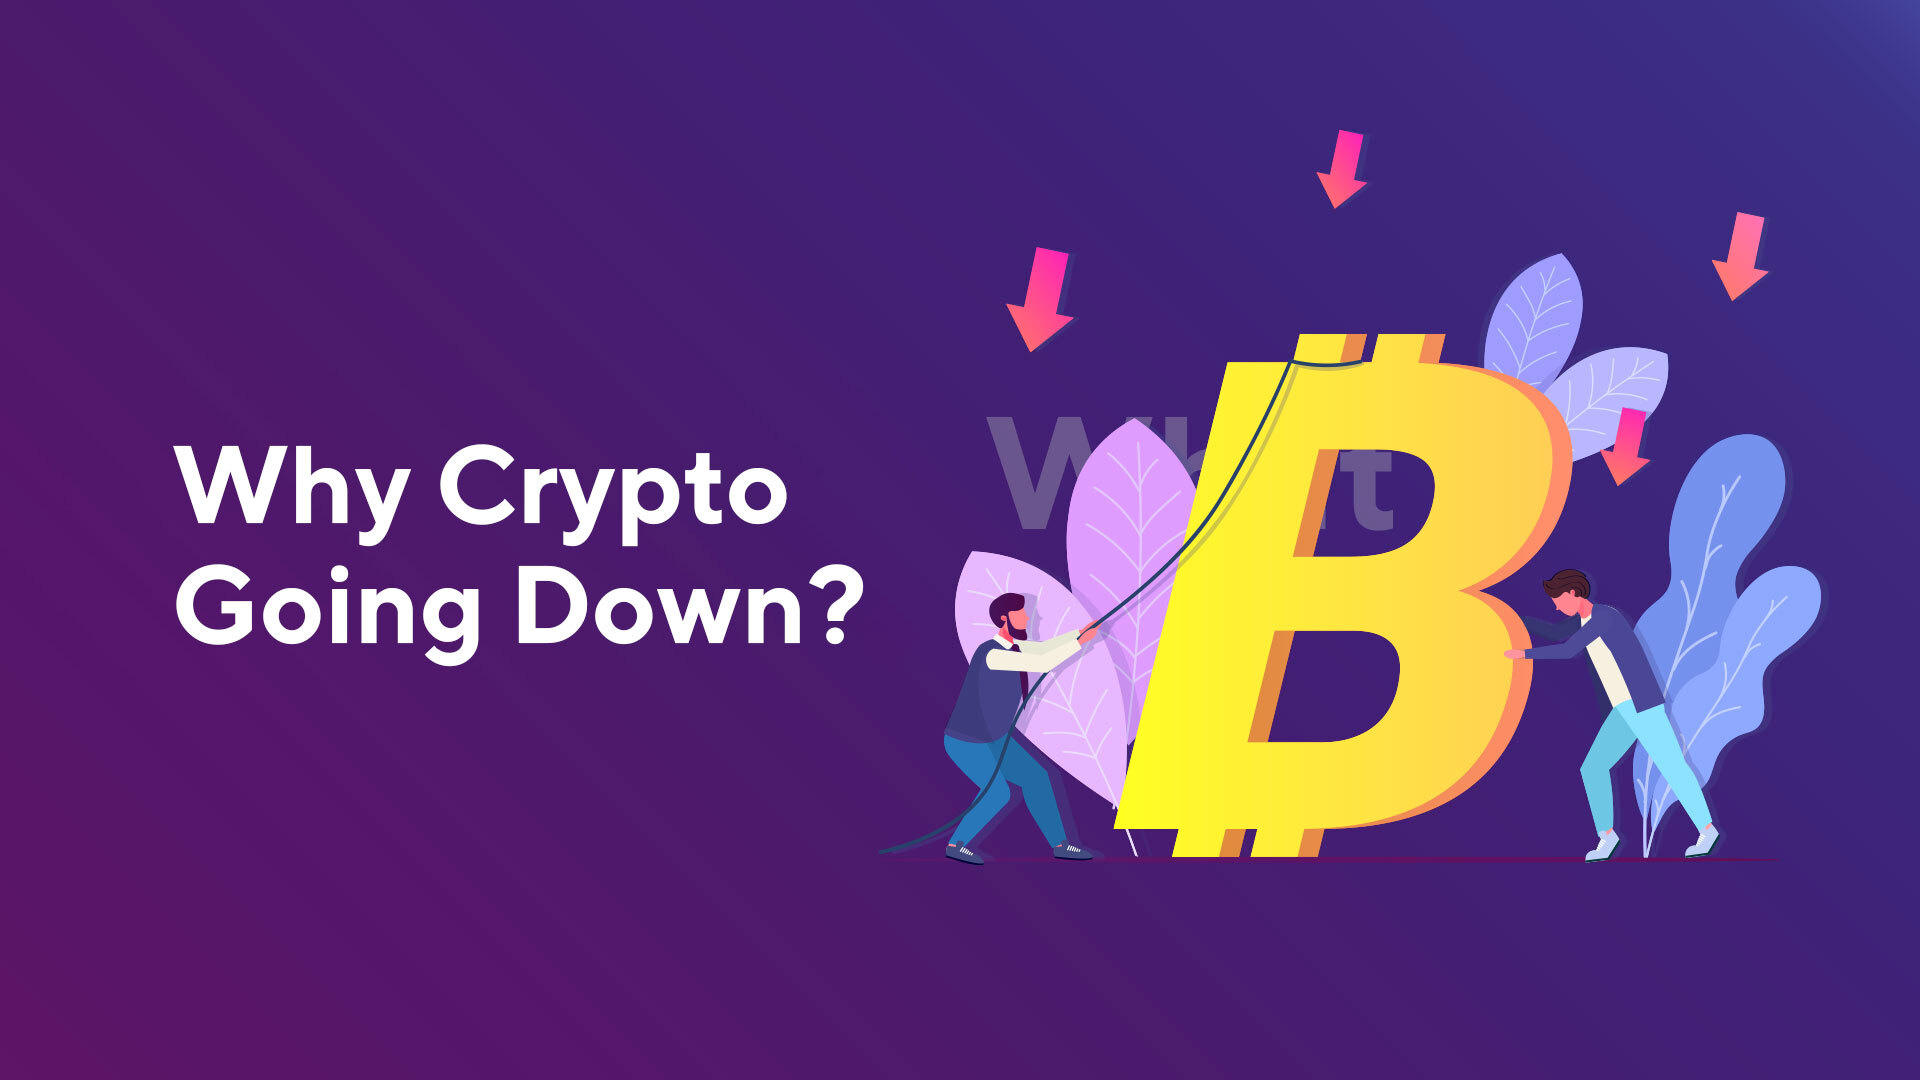 how long will crypto go down